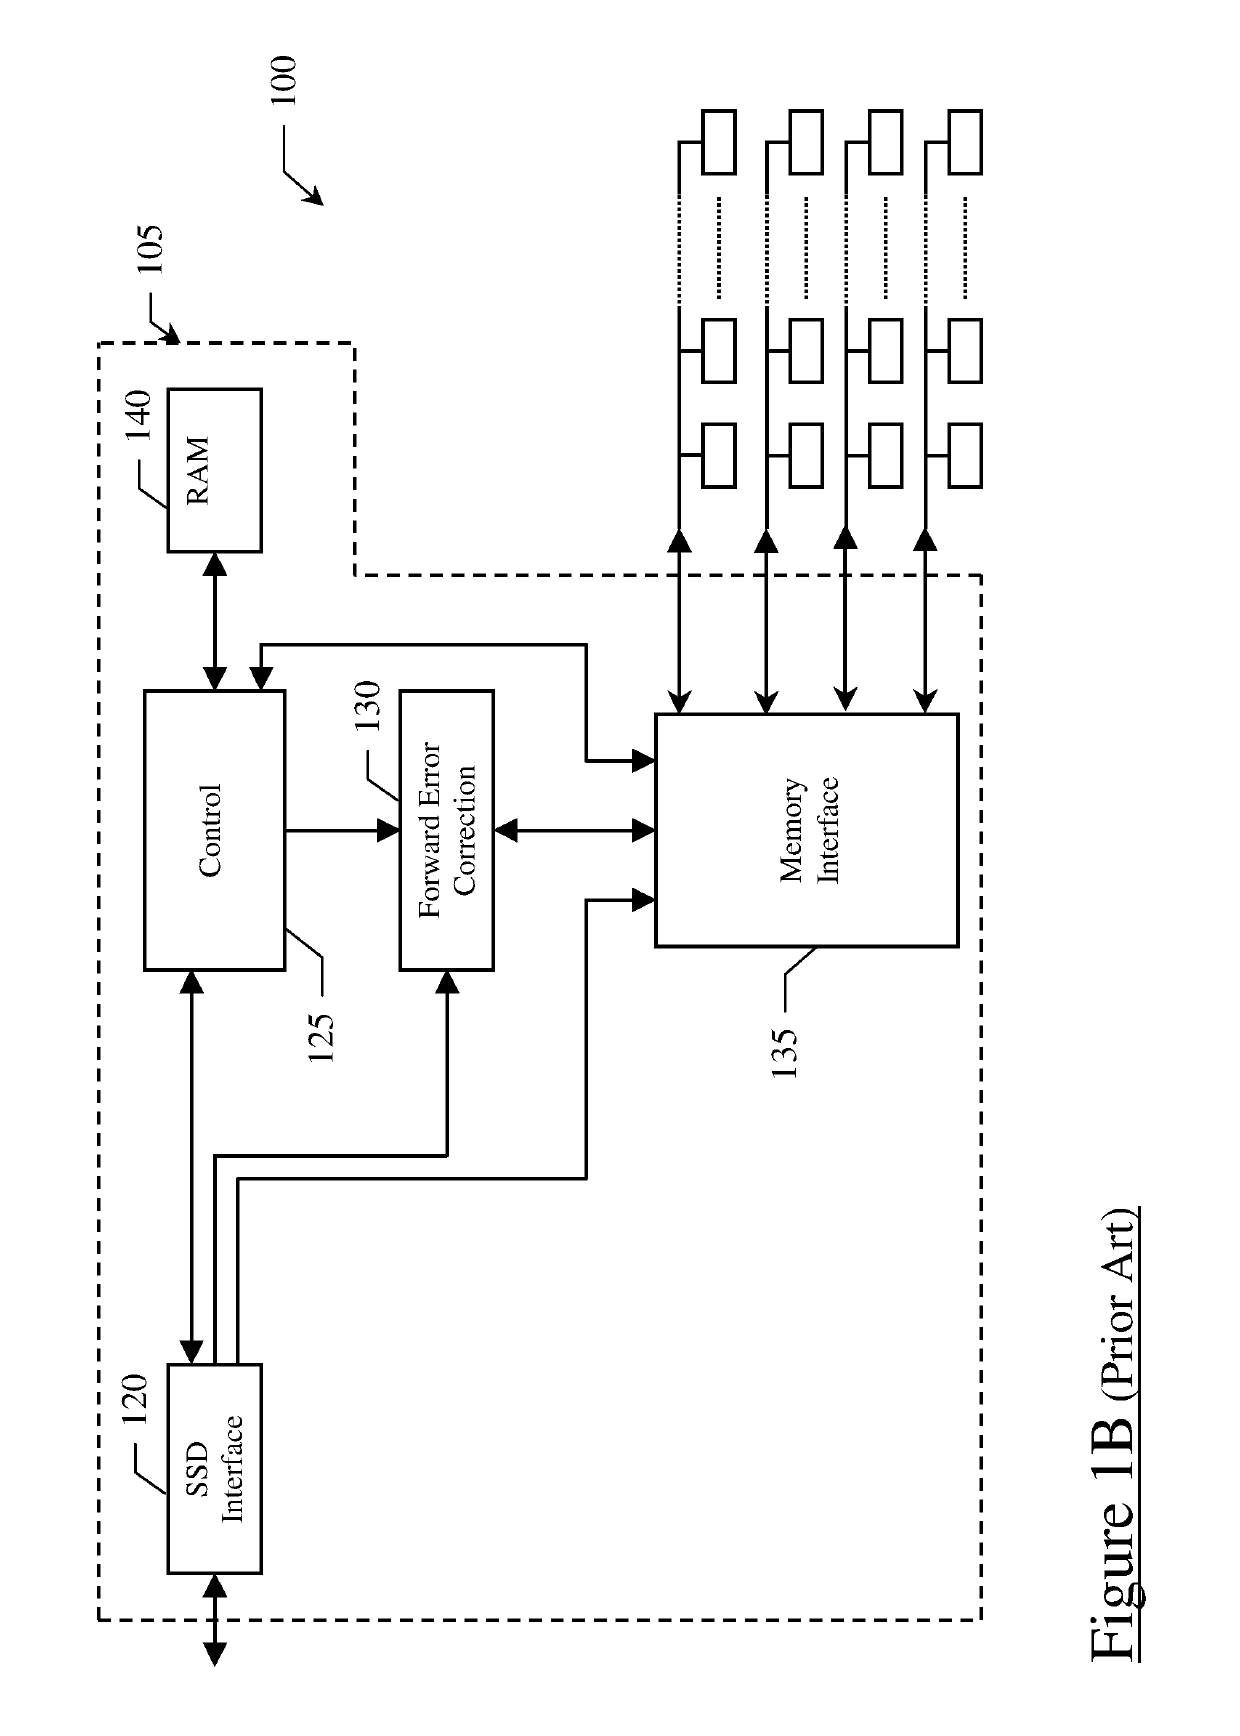 Method for decoding bits in a solid state drive, and related solid state drive